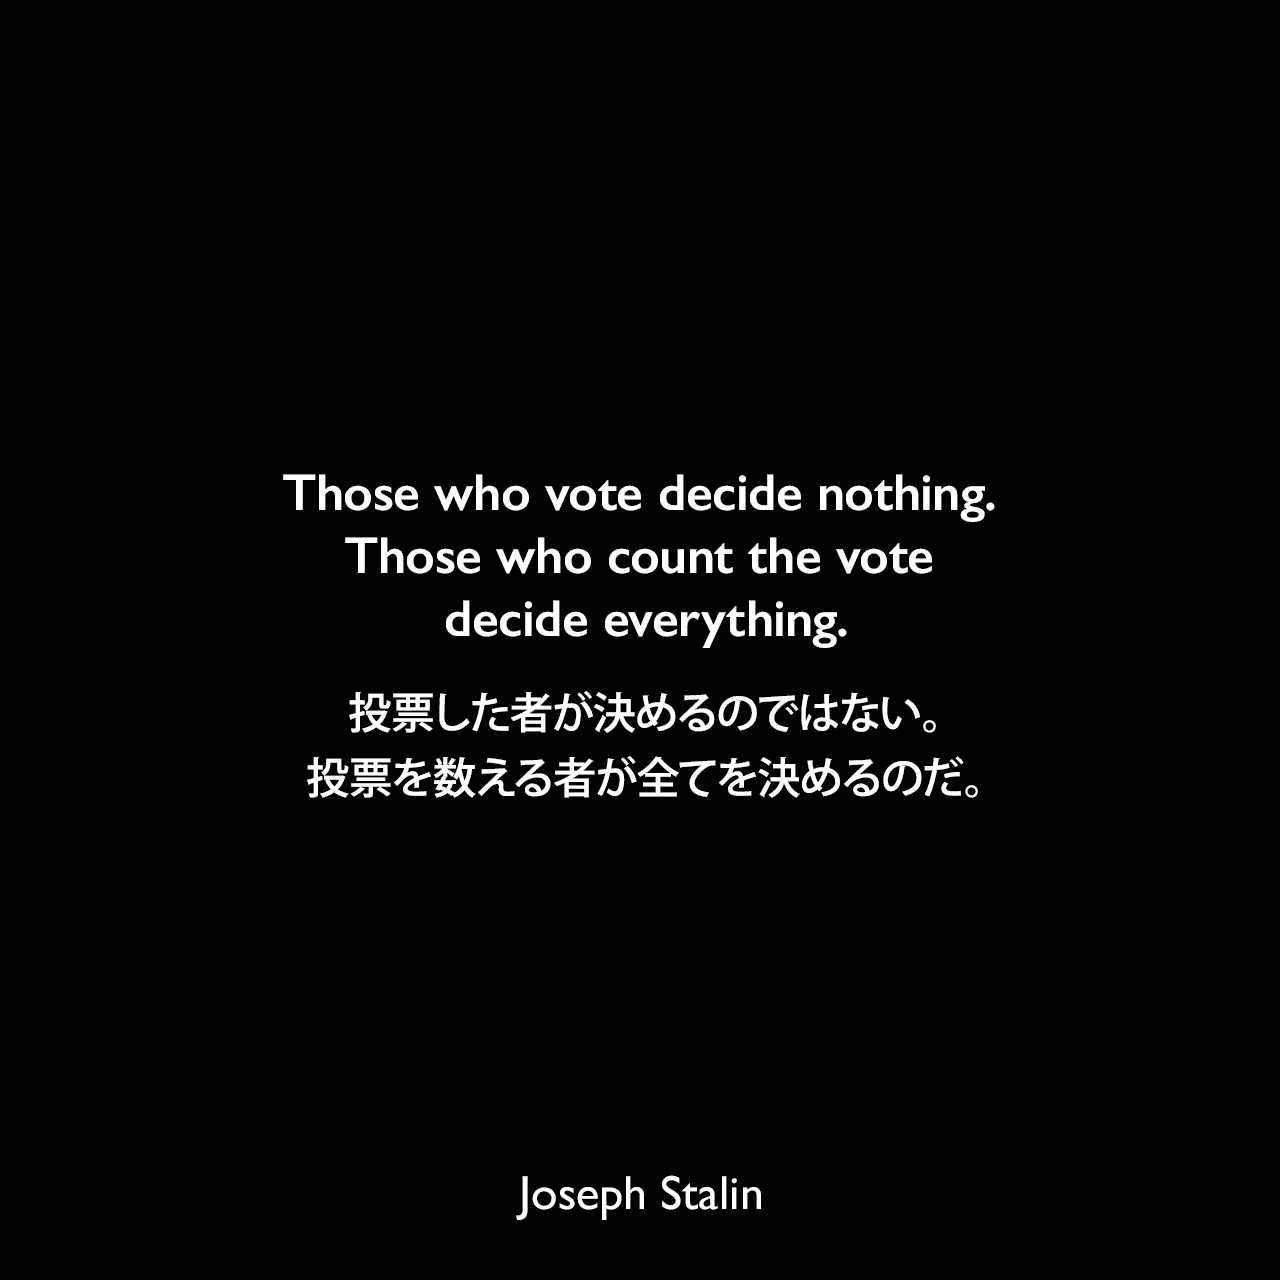 Those who vote decide nothing. Those who count the vote decide everything.投票した者が決めるのではない。投票を数える者が全てを決めるのだ。Joseph Stalin